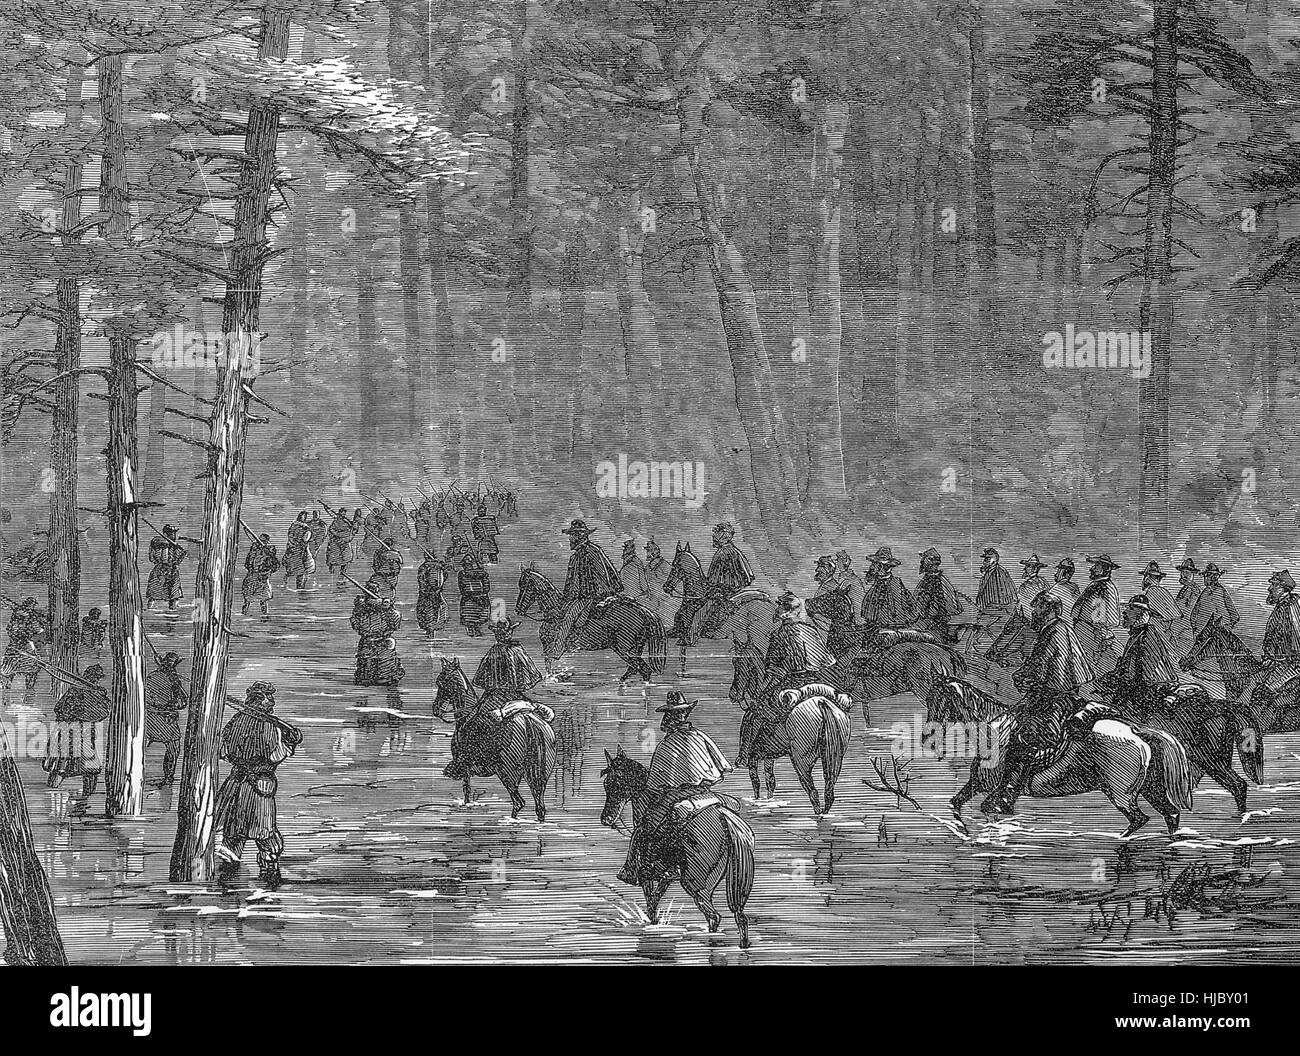 AMERICAN CIVIL WAR  Union General Sherman's troops advance through the swampy Salkenhatchie River area in South Carolina in February 1865 Stock Photo